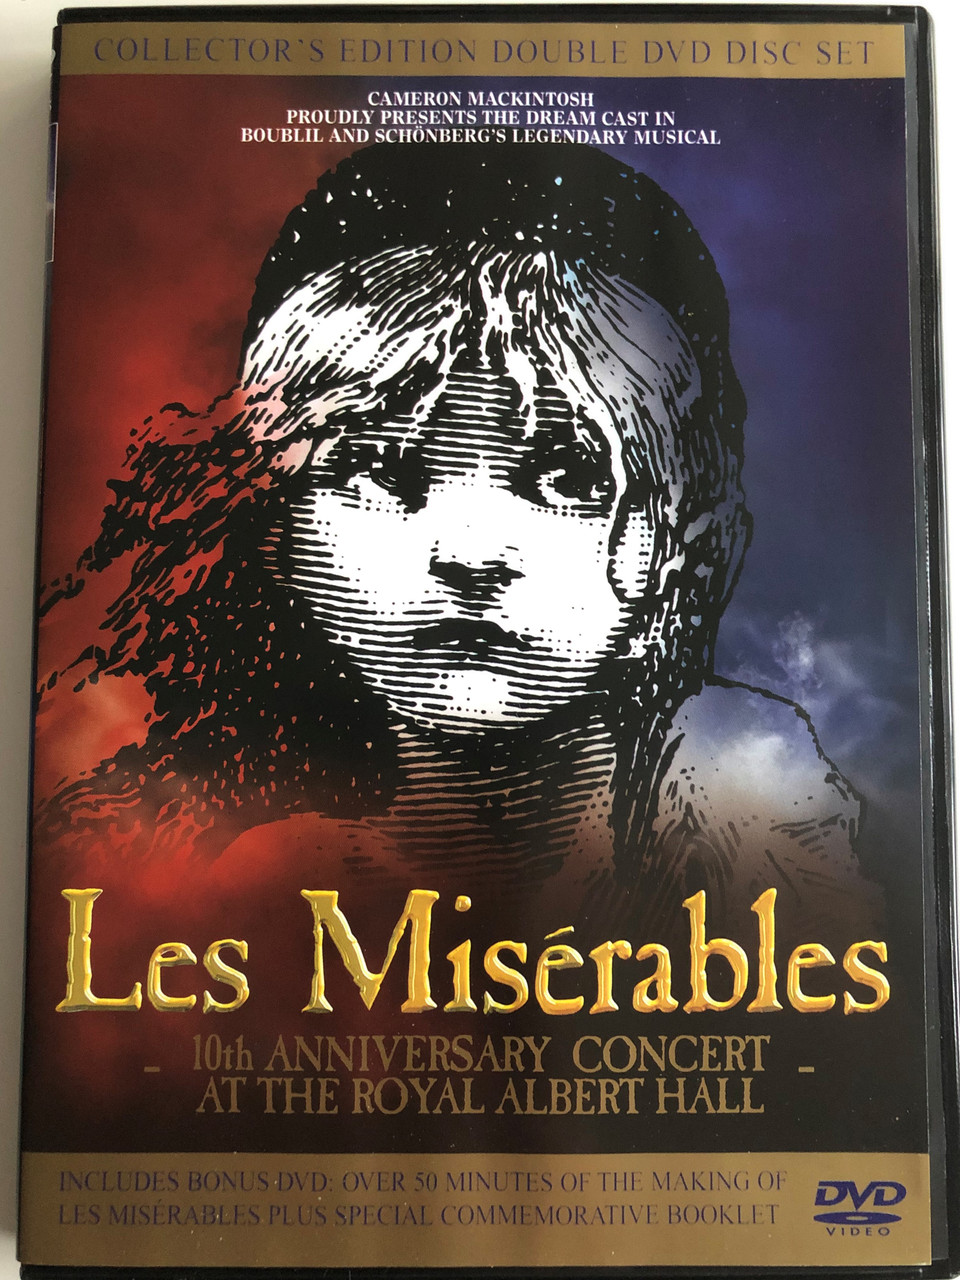 Les Misérables DVD 2004 The Miserables / Collectors's Edition Double DVD  Disc Set / 10th Anniversary Concert at the Royal Albert Hall / Colm  Wilkinson, Ruthie Henshall, Lea Salonga, Hannah Chick - bibleinmylanguage